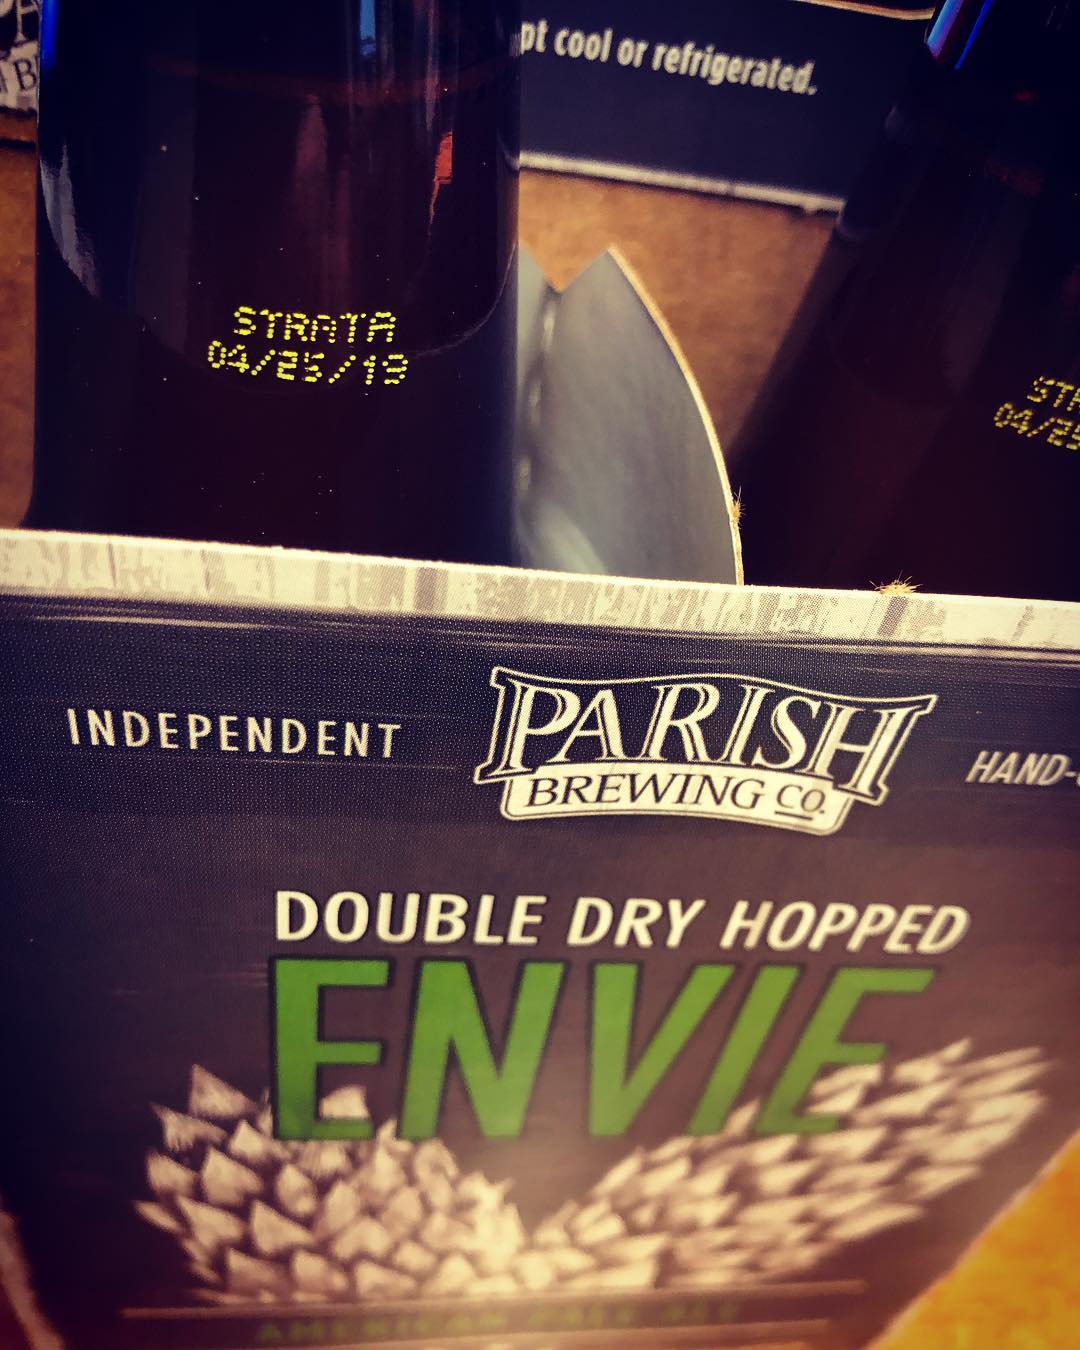 @parishbrewingco DDH Envie is now available at our Perkins Rd location! #freshhops #beer #drinklocal #haze